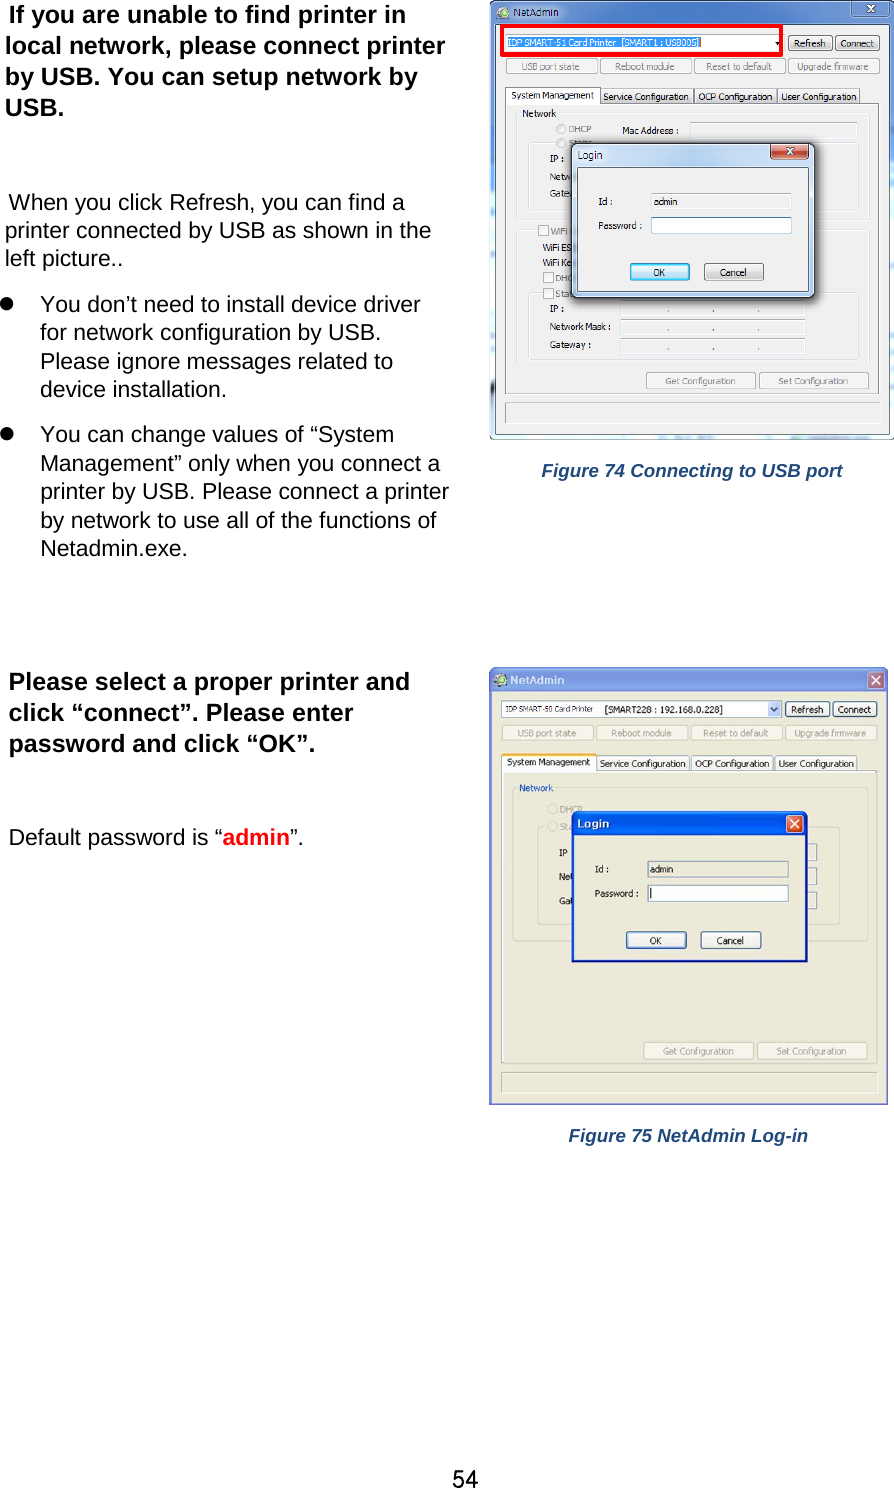 54  If you are unable to find printer in local network, please connect printer by USB. You can setup network by USB.  When you click Refresh, you can find a printer connected by USB as shown in the left picture..  You don’t need to install device driver for network configuration by USB. Please ignore messages related to device installation.  You can change values of “System Management” only when you connect a printer by USB. Please connect a printer by network to use all of the functions of Netadmin.exe.   Figure 74 Connecting to USB port  Please select a proper printer and click “connect”. Please enter password and click “OK”.    Default password is “admin”.   Figure 75 NetAdmin Log-in  